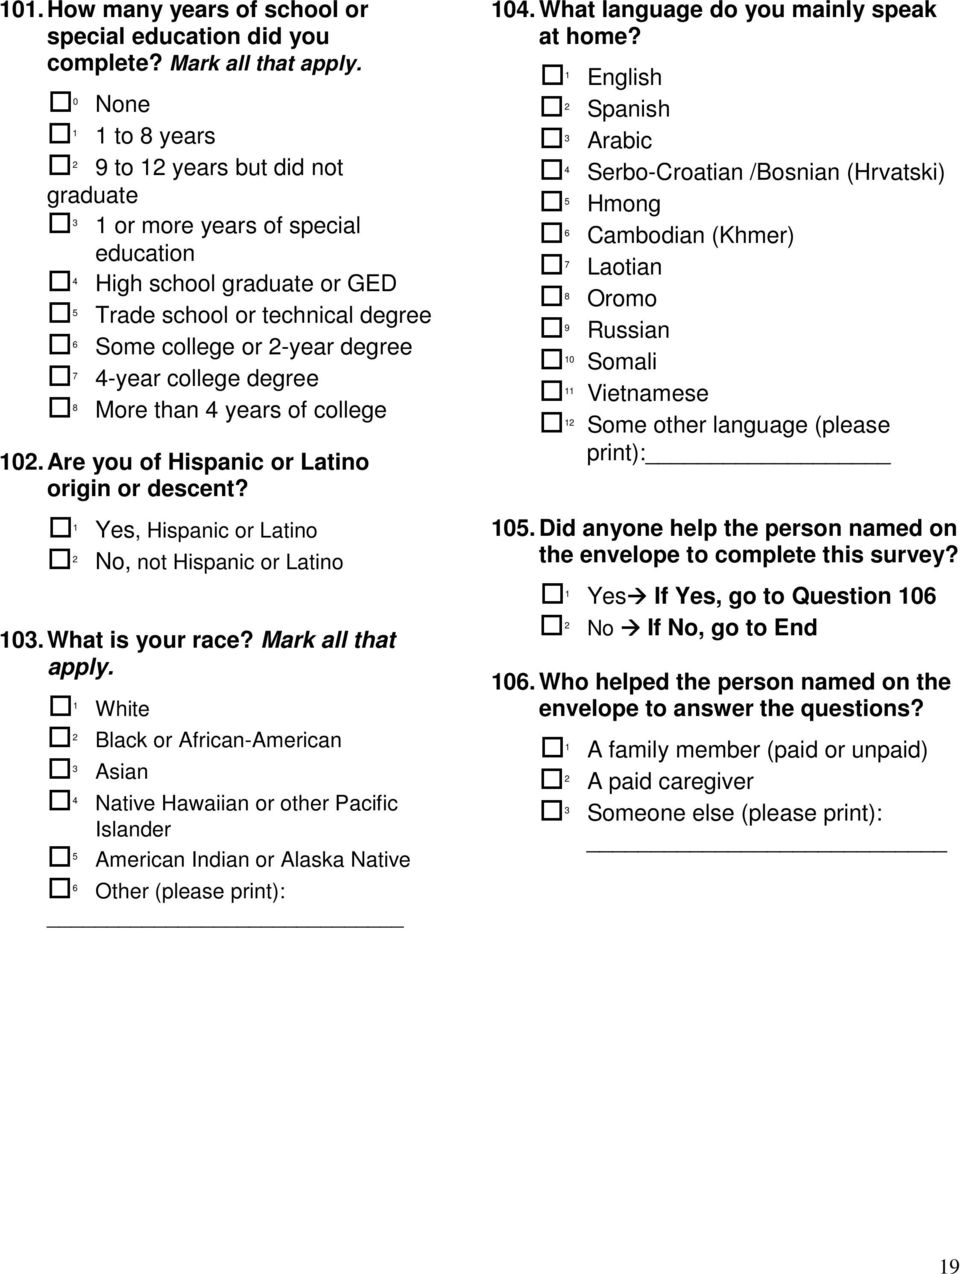 degree More than 4 years of college 8 102. Are you of Hispanic or Latino origin or descent? Yes, Hispanic or Latino, not Hispanic or Latino 103. What is your race? Mark all that apply.